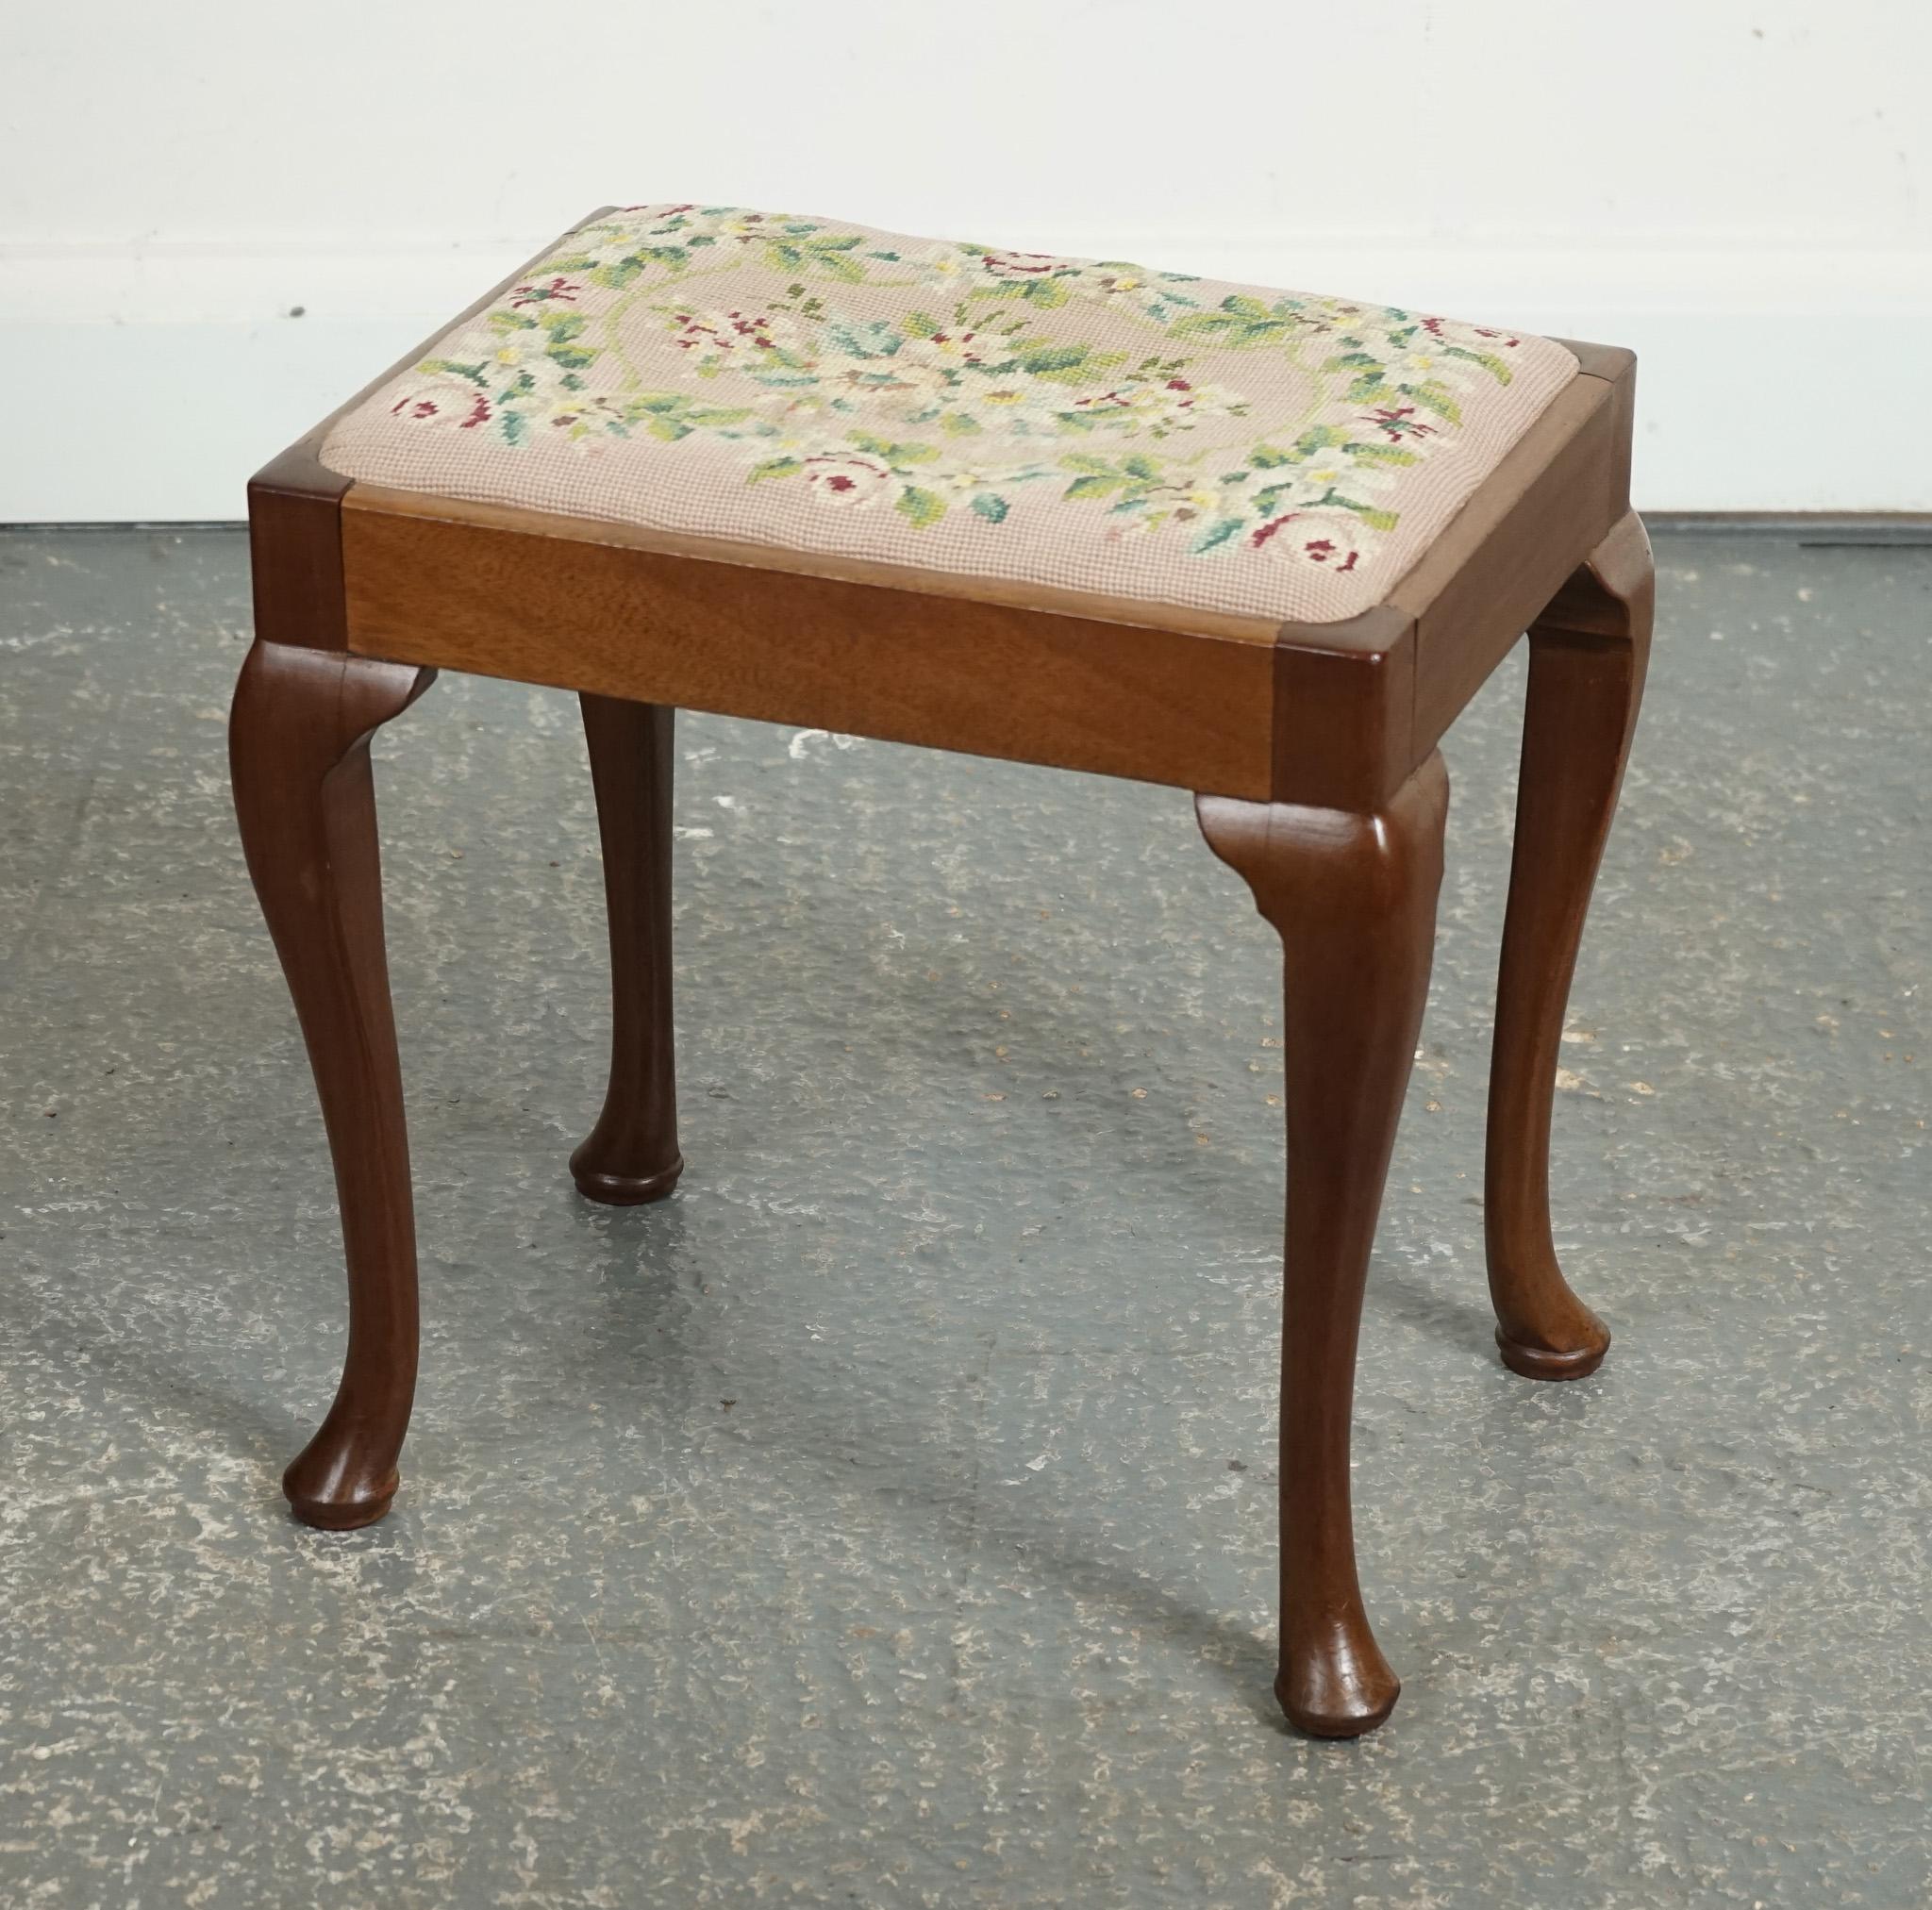 
We are delighted to offer for sale this Lovely Piano Stool With Flower Stitch-work.

Please carefully examine the pictures to see the condition before purchasing, as they form part of the description. If you have any questions, please message us.